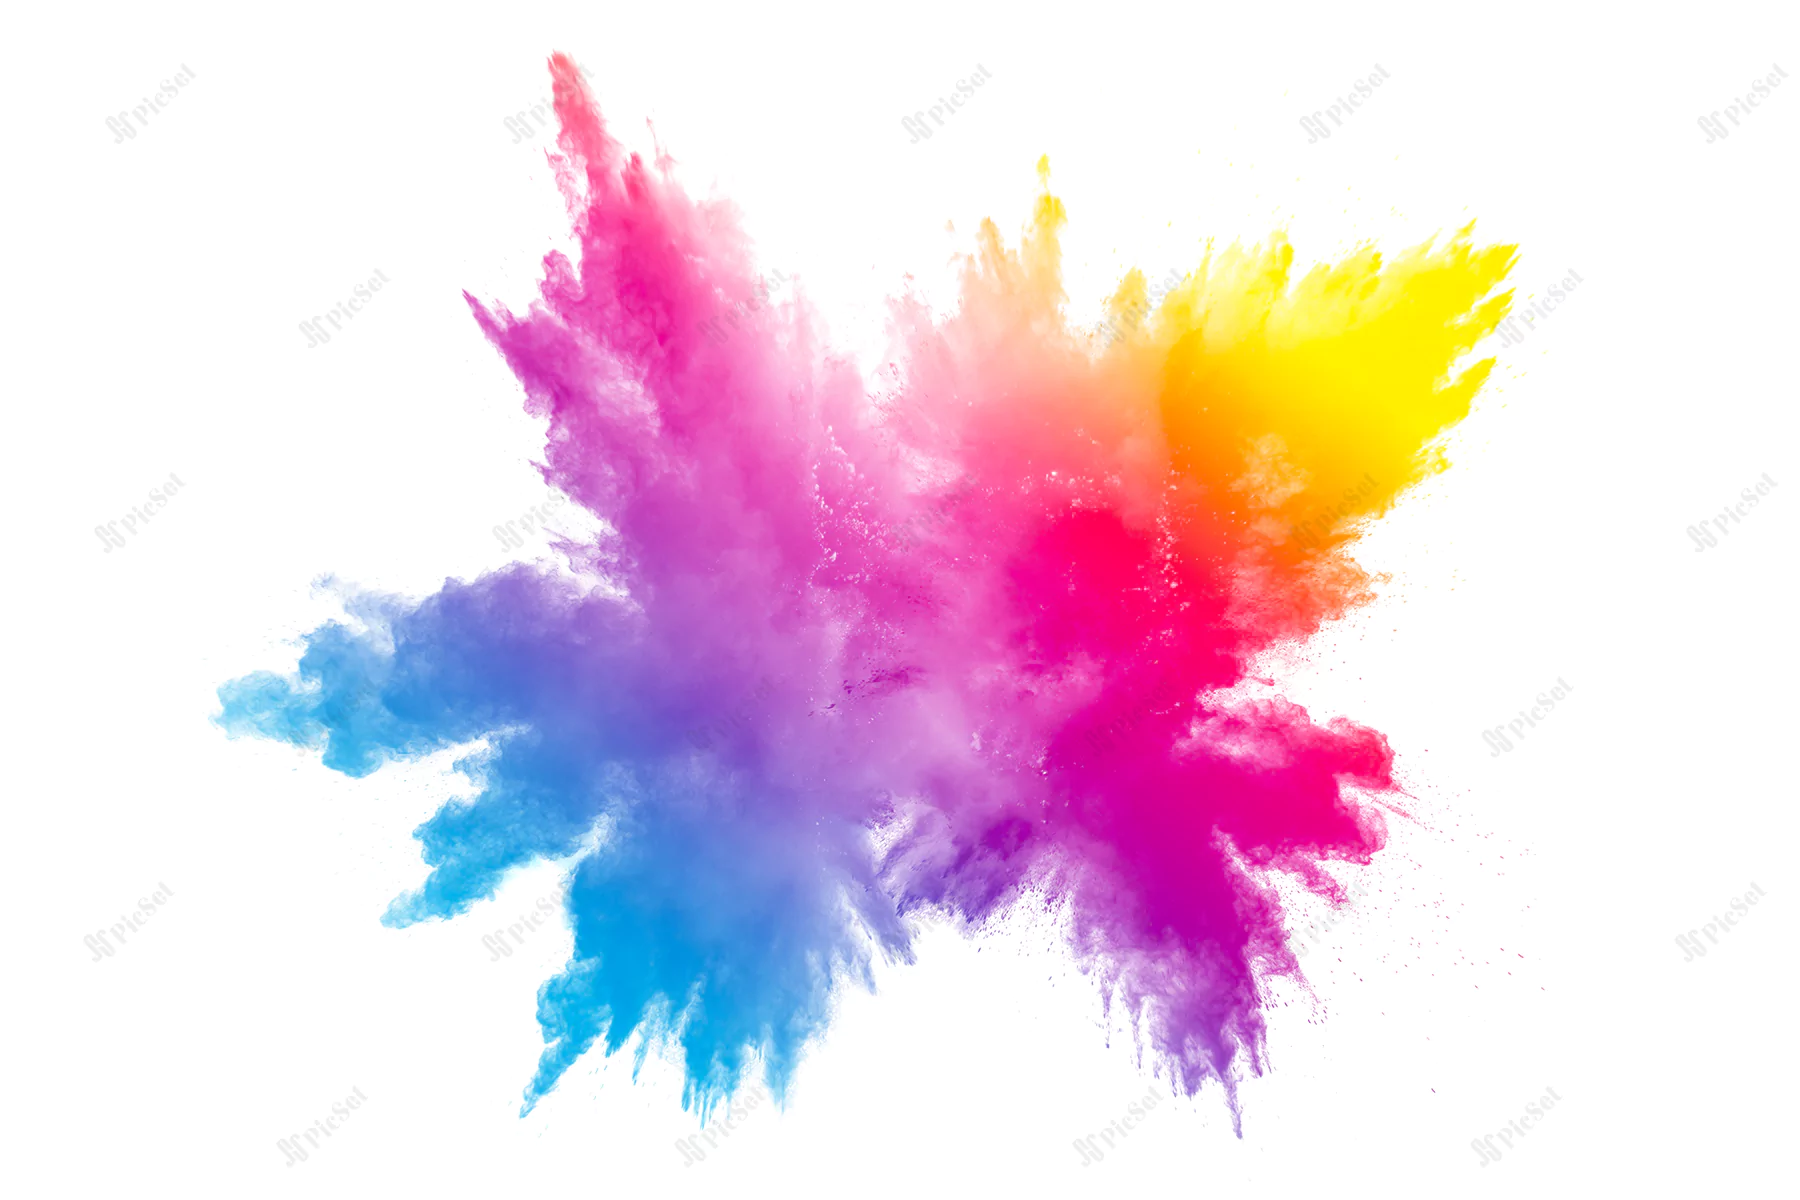 backgrounds/colorful background/Photos/multi-color-powder-explosion-white-background.jpg